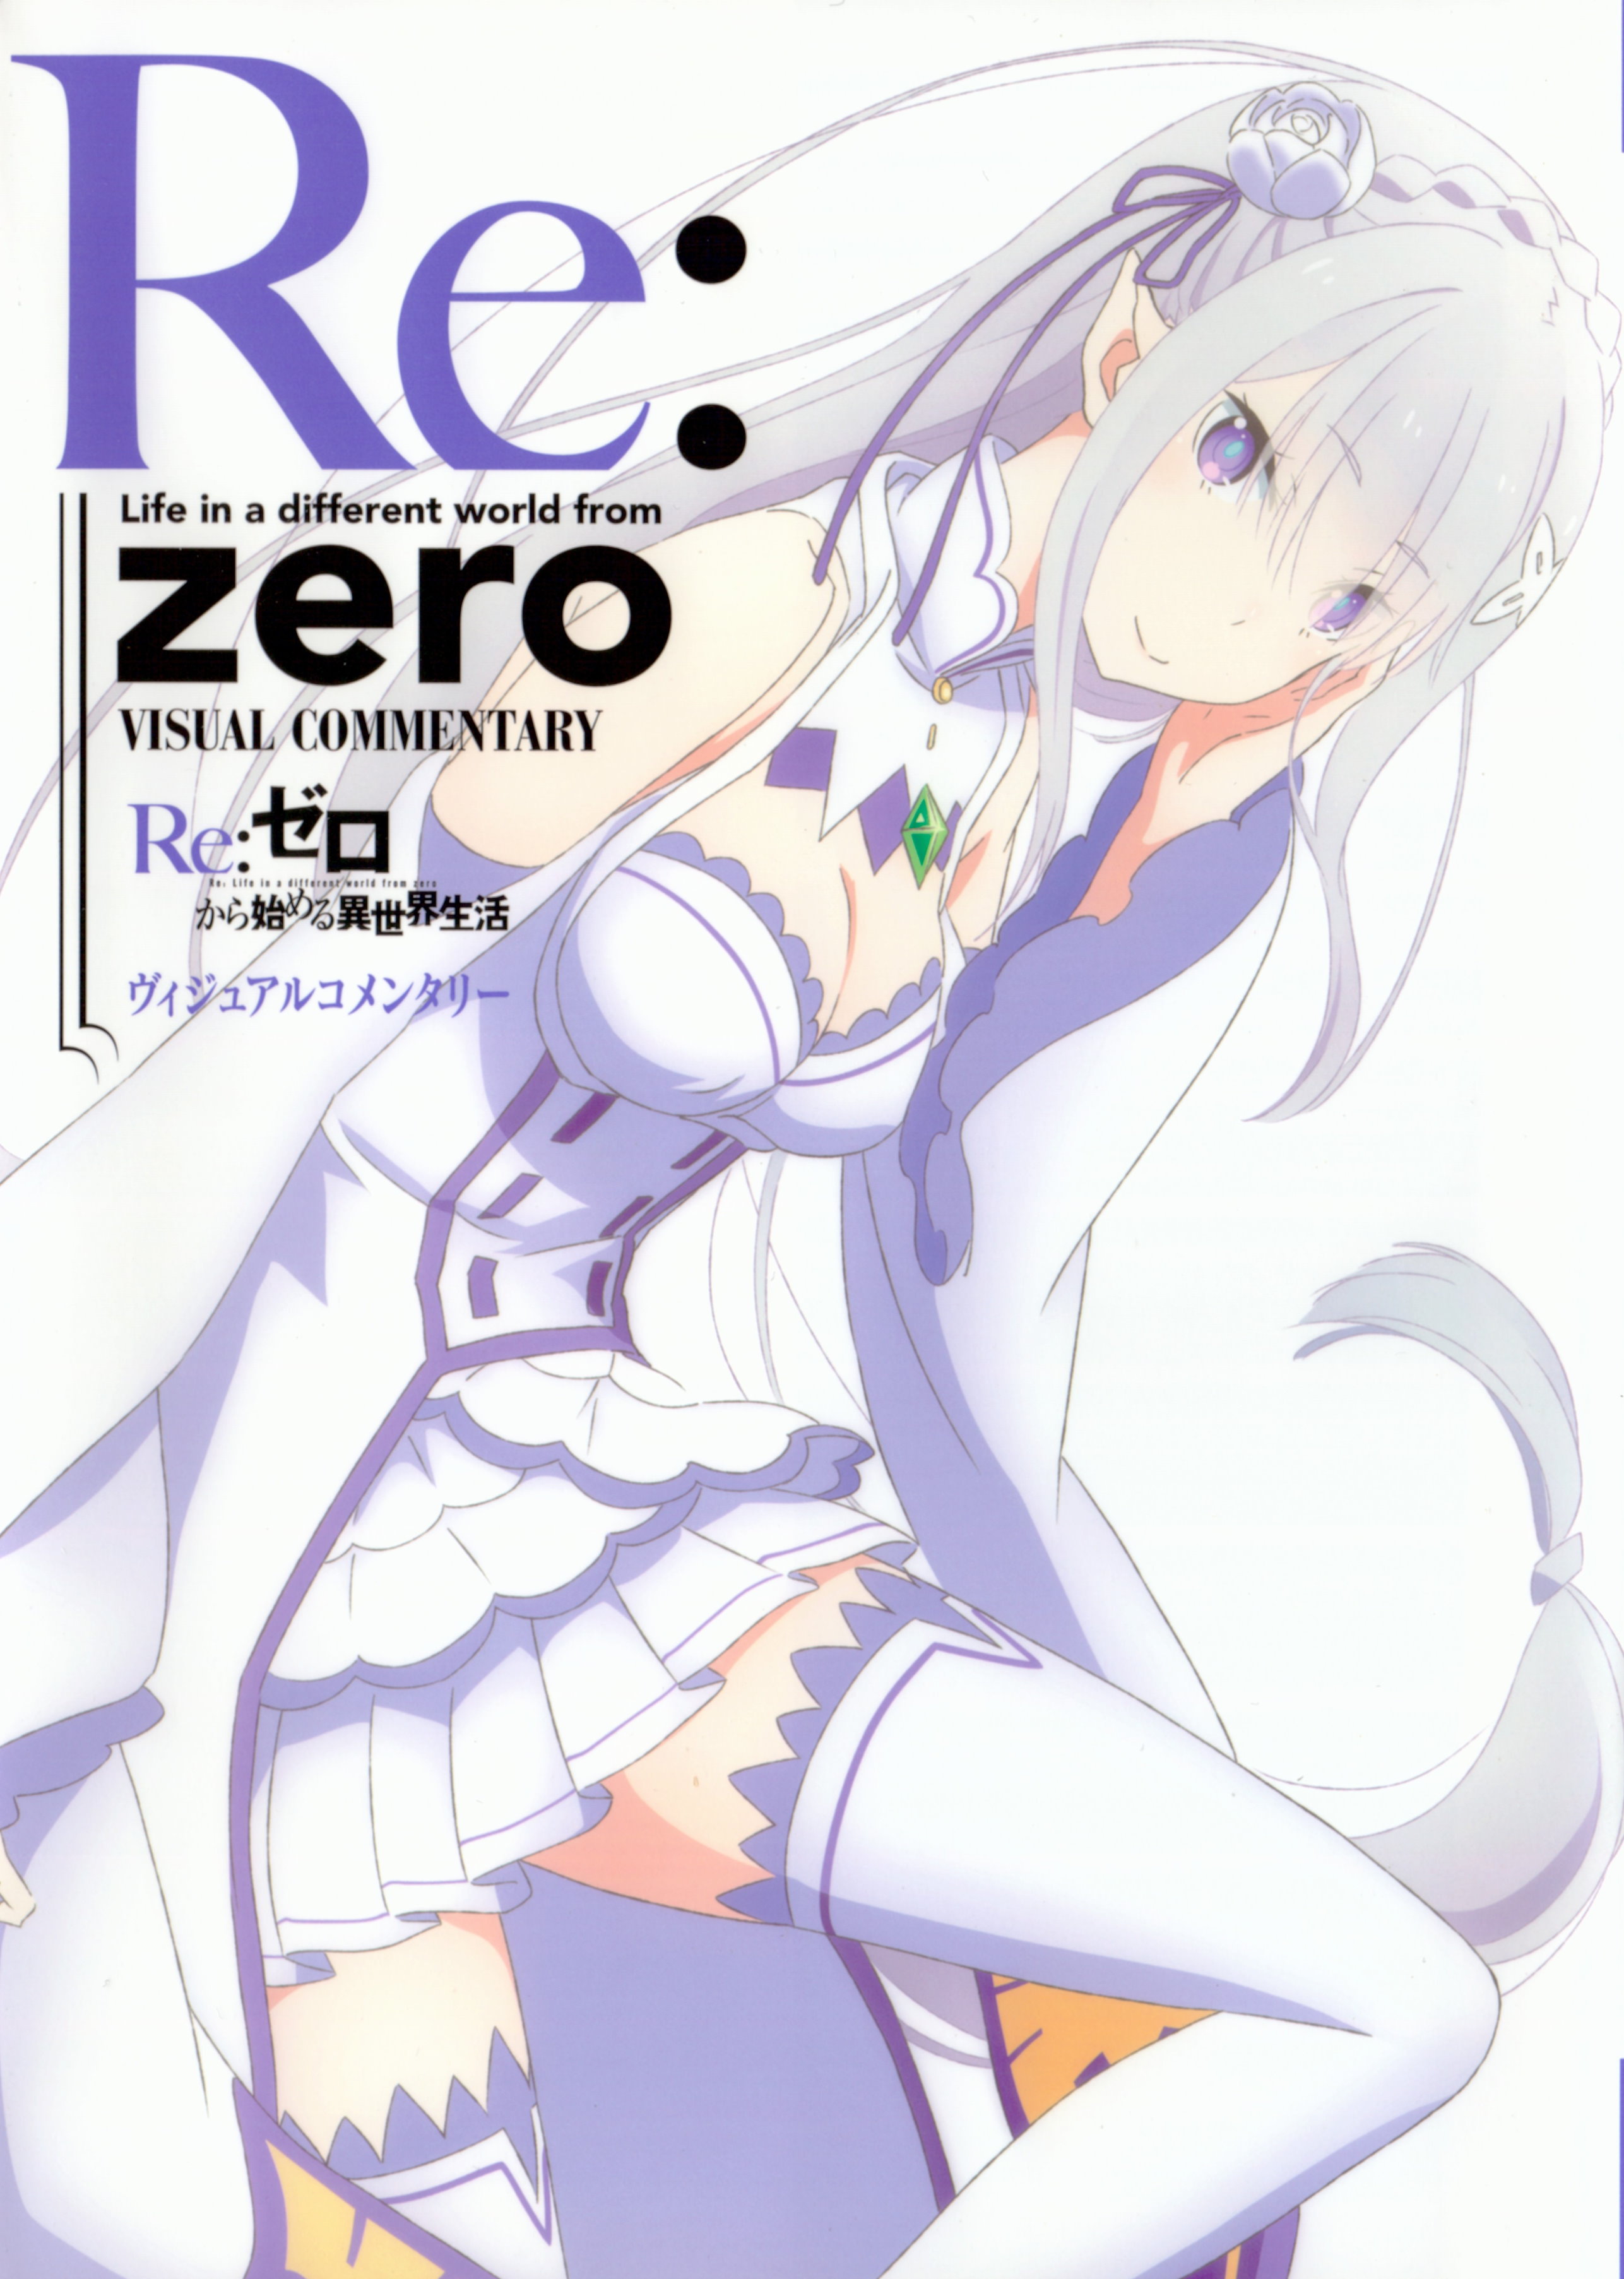 Re:ZERO on X: We also have a tease for the character settings of